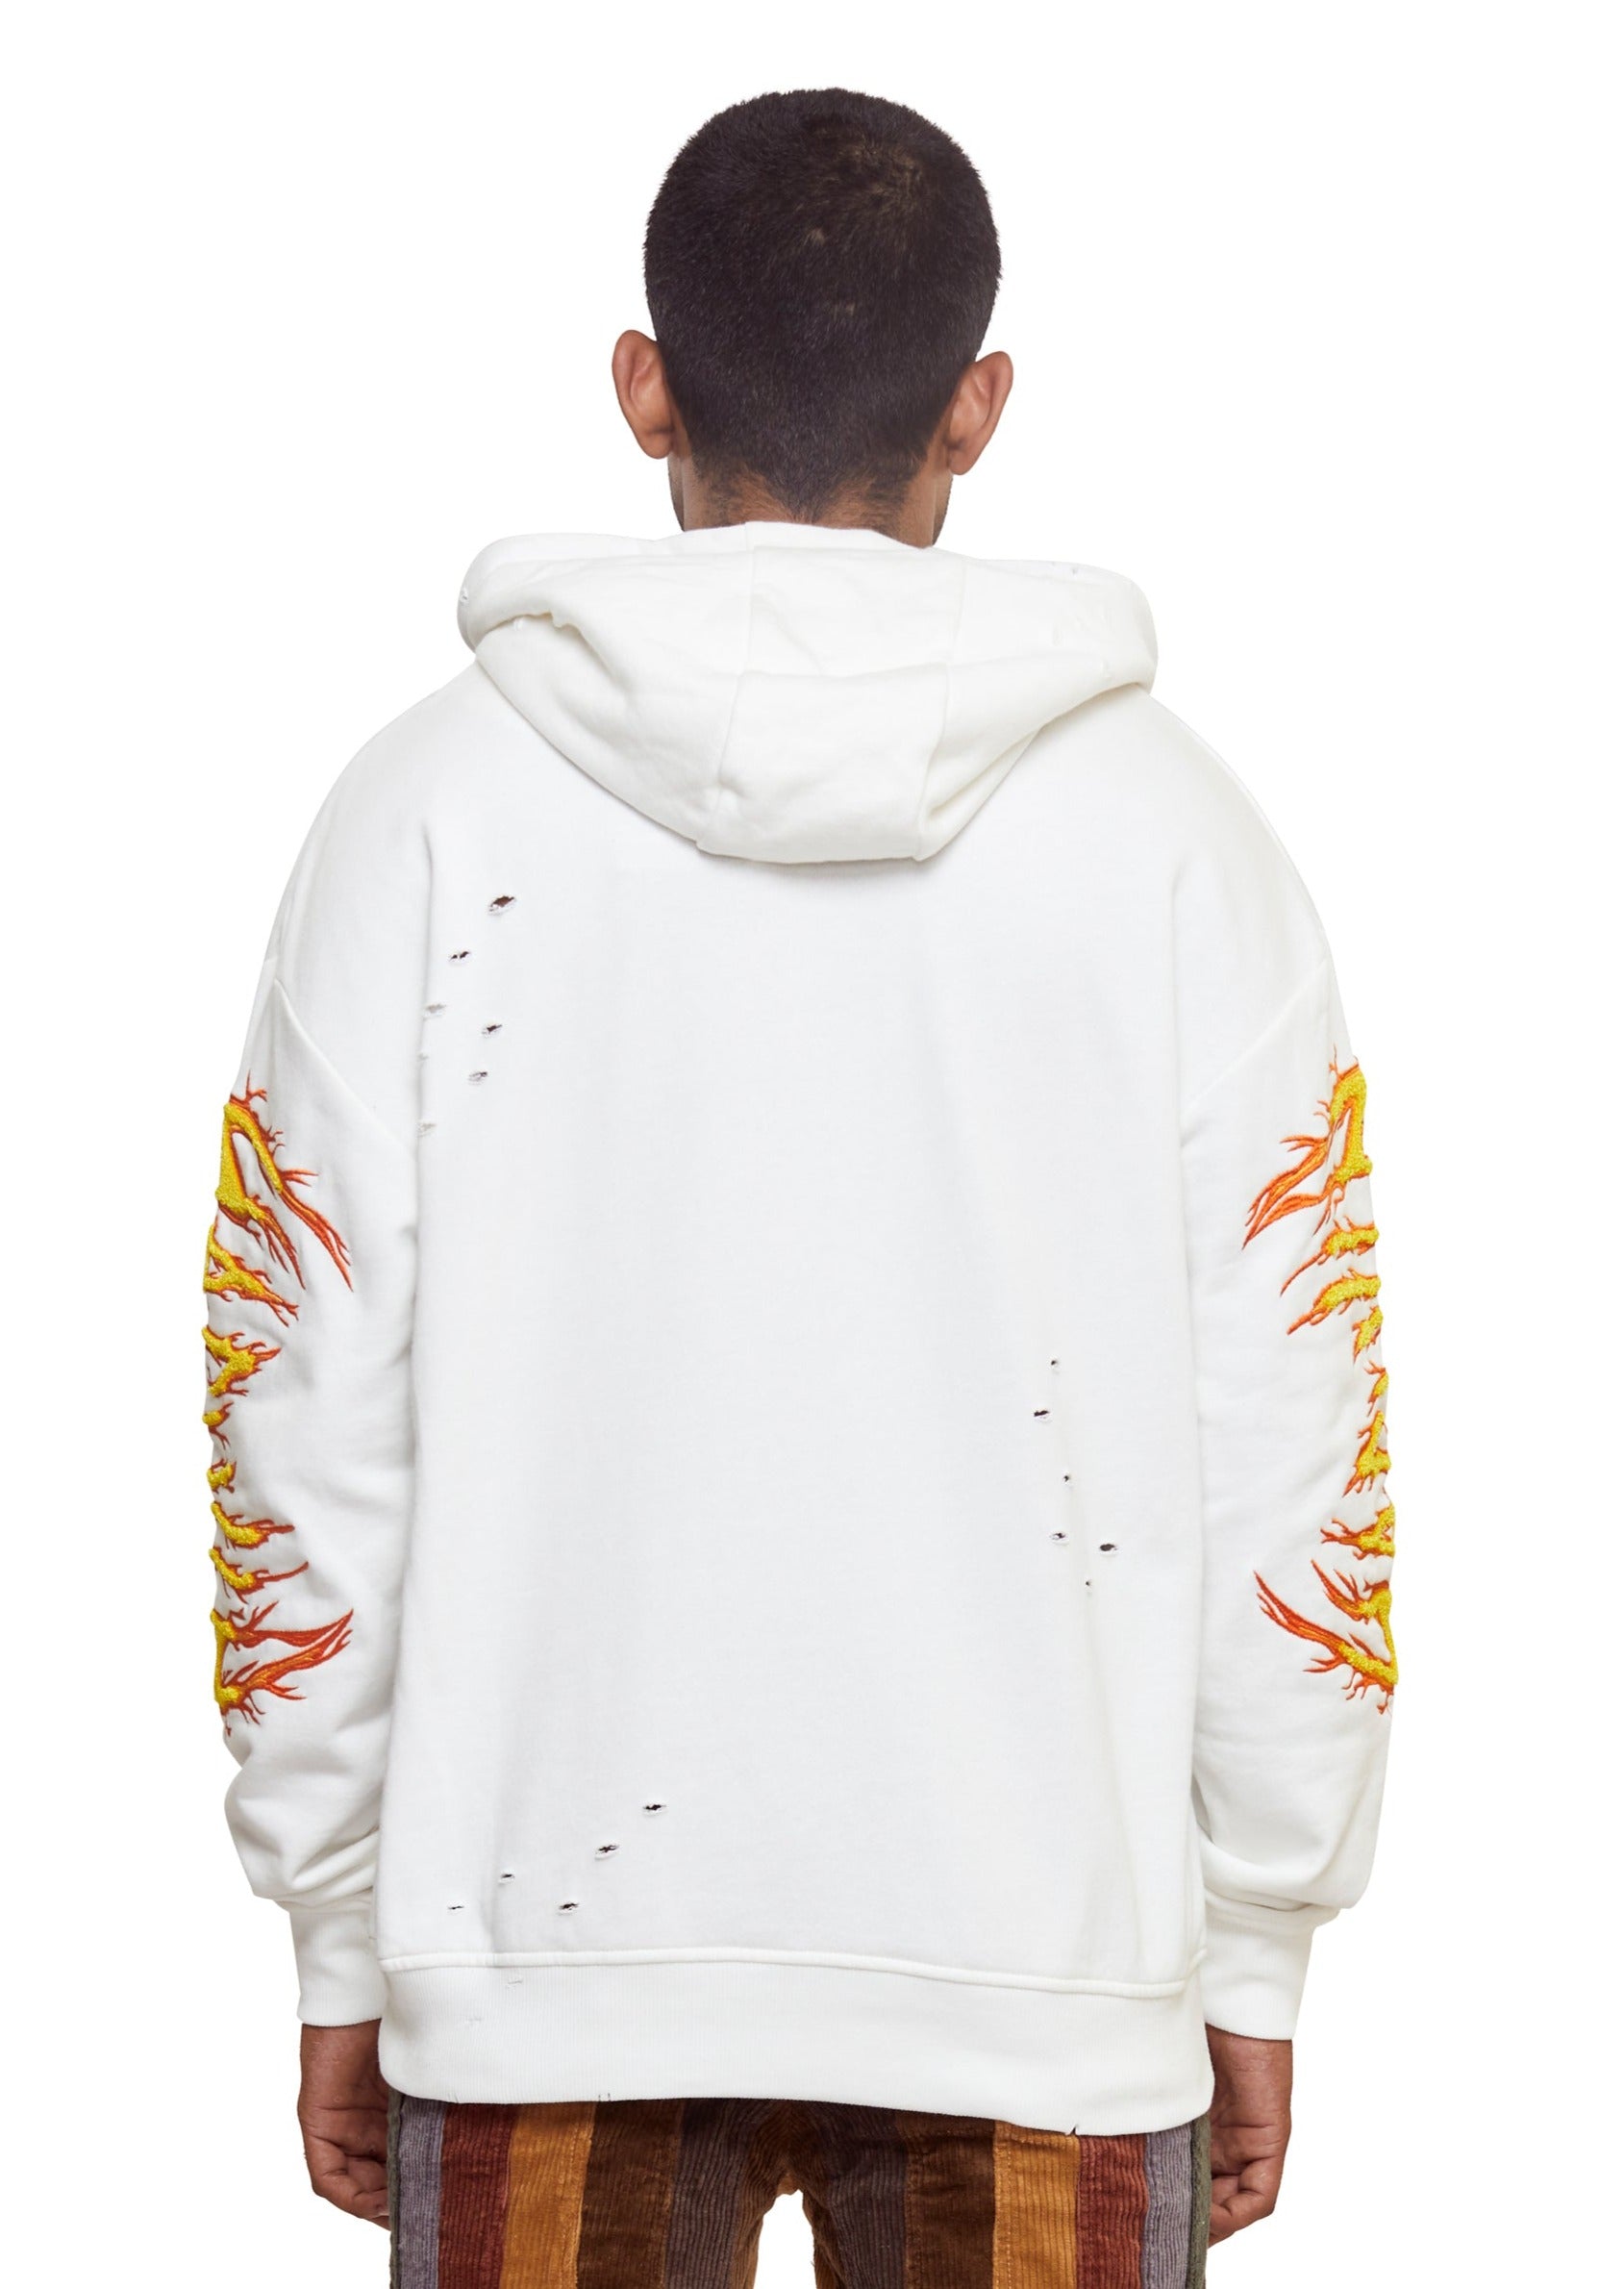 White Distressed cotton "Hac on Fire" embroidered over-sized drop shoulder pull-over hoodie from the brand Haculla